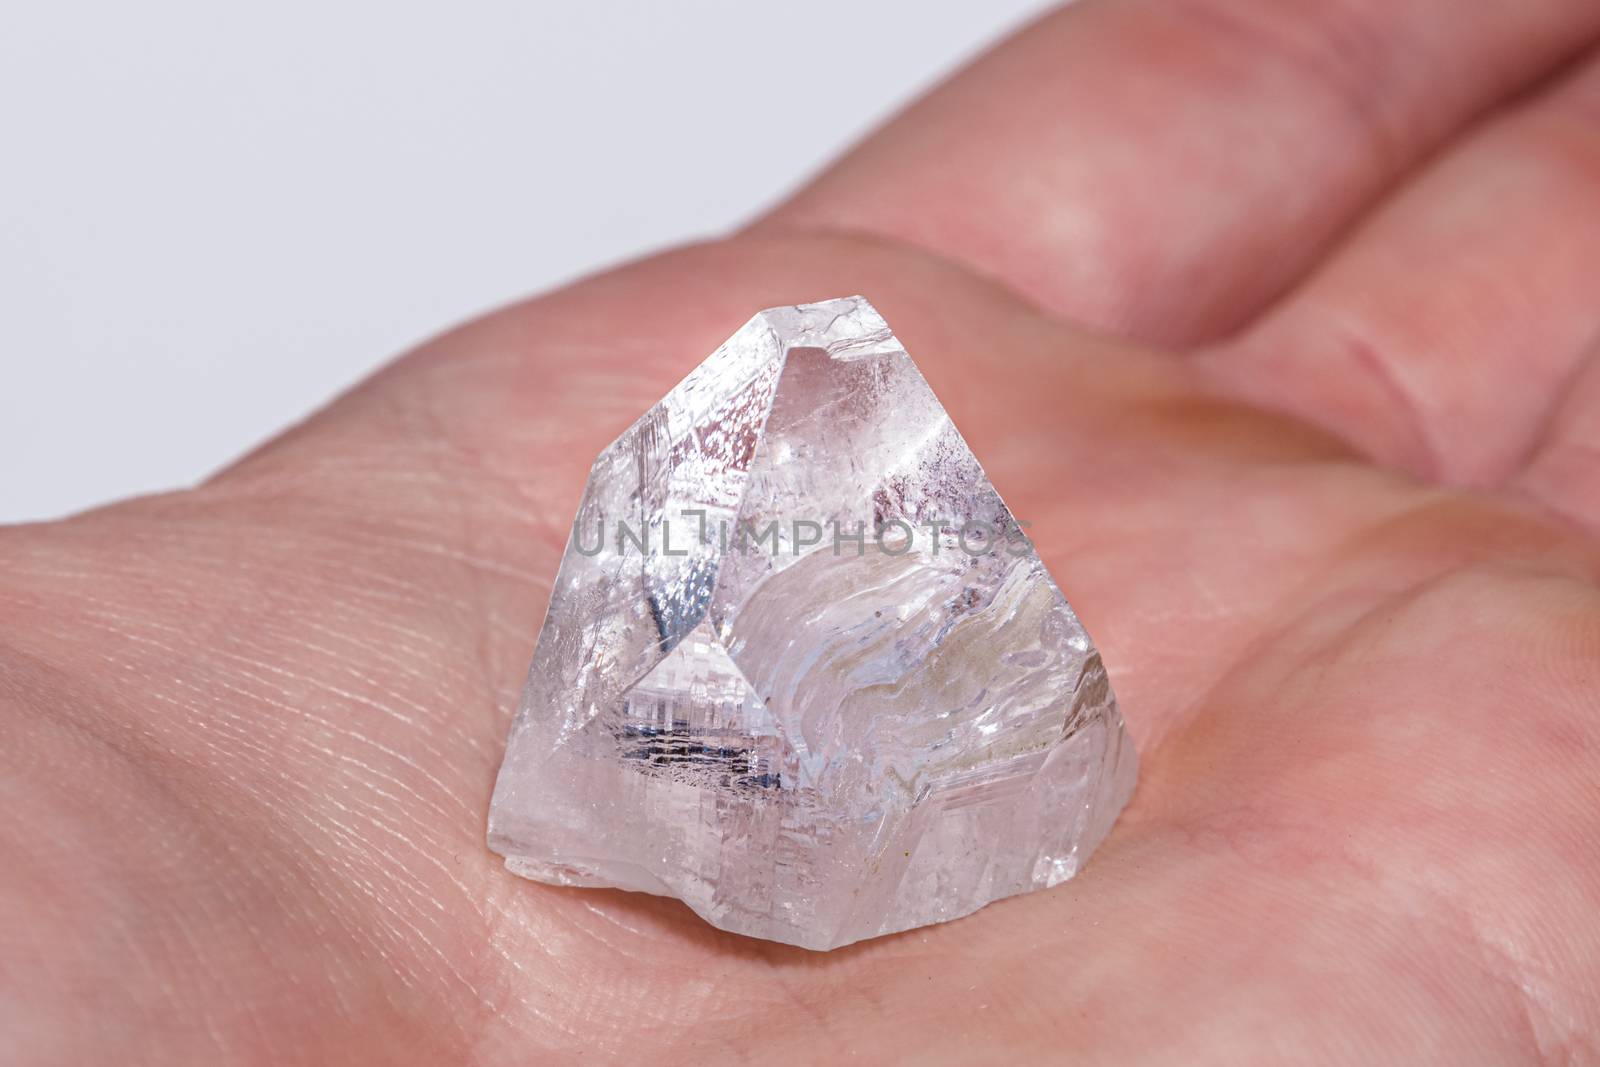 Dob rough diamond formed by volcanic heat and pressure inside earth in hand